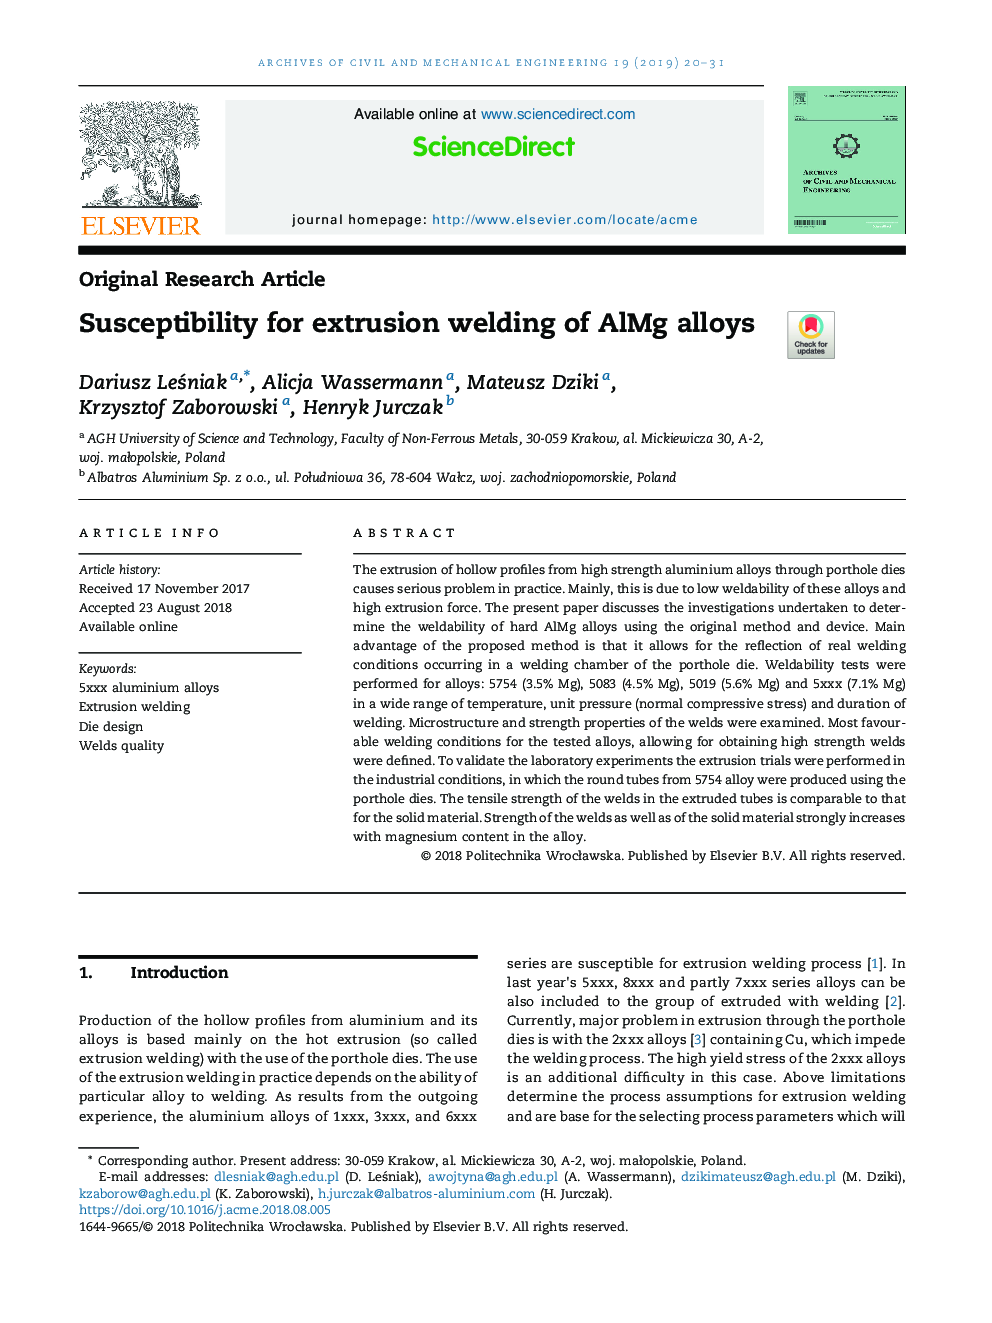 Susceptibility for extrusion welding of AlMg alloys